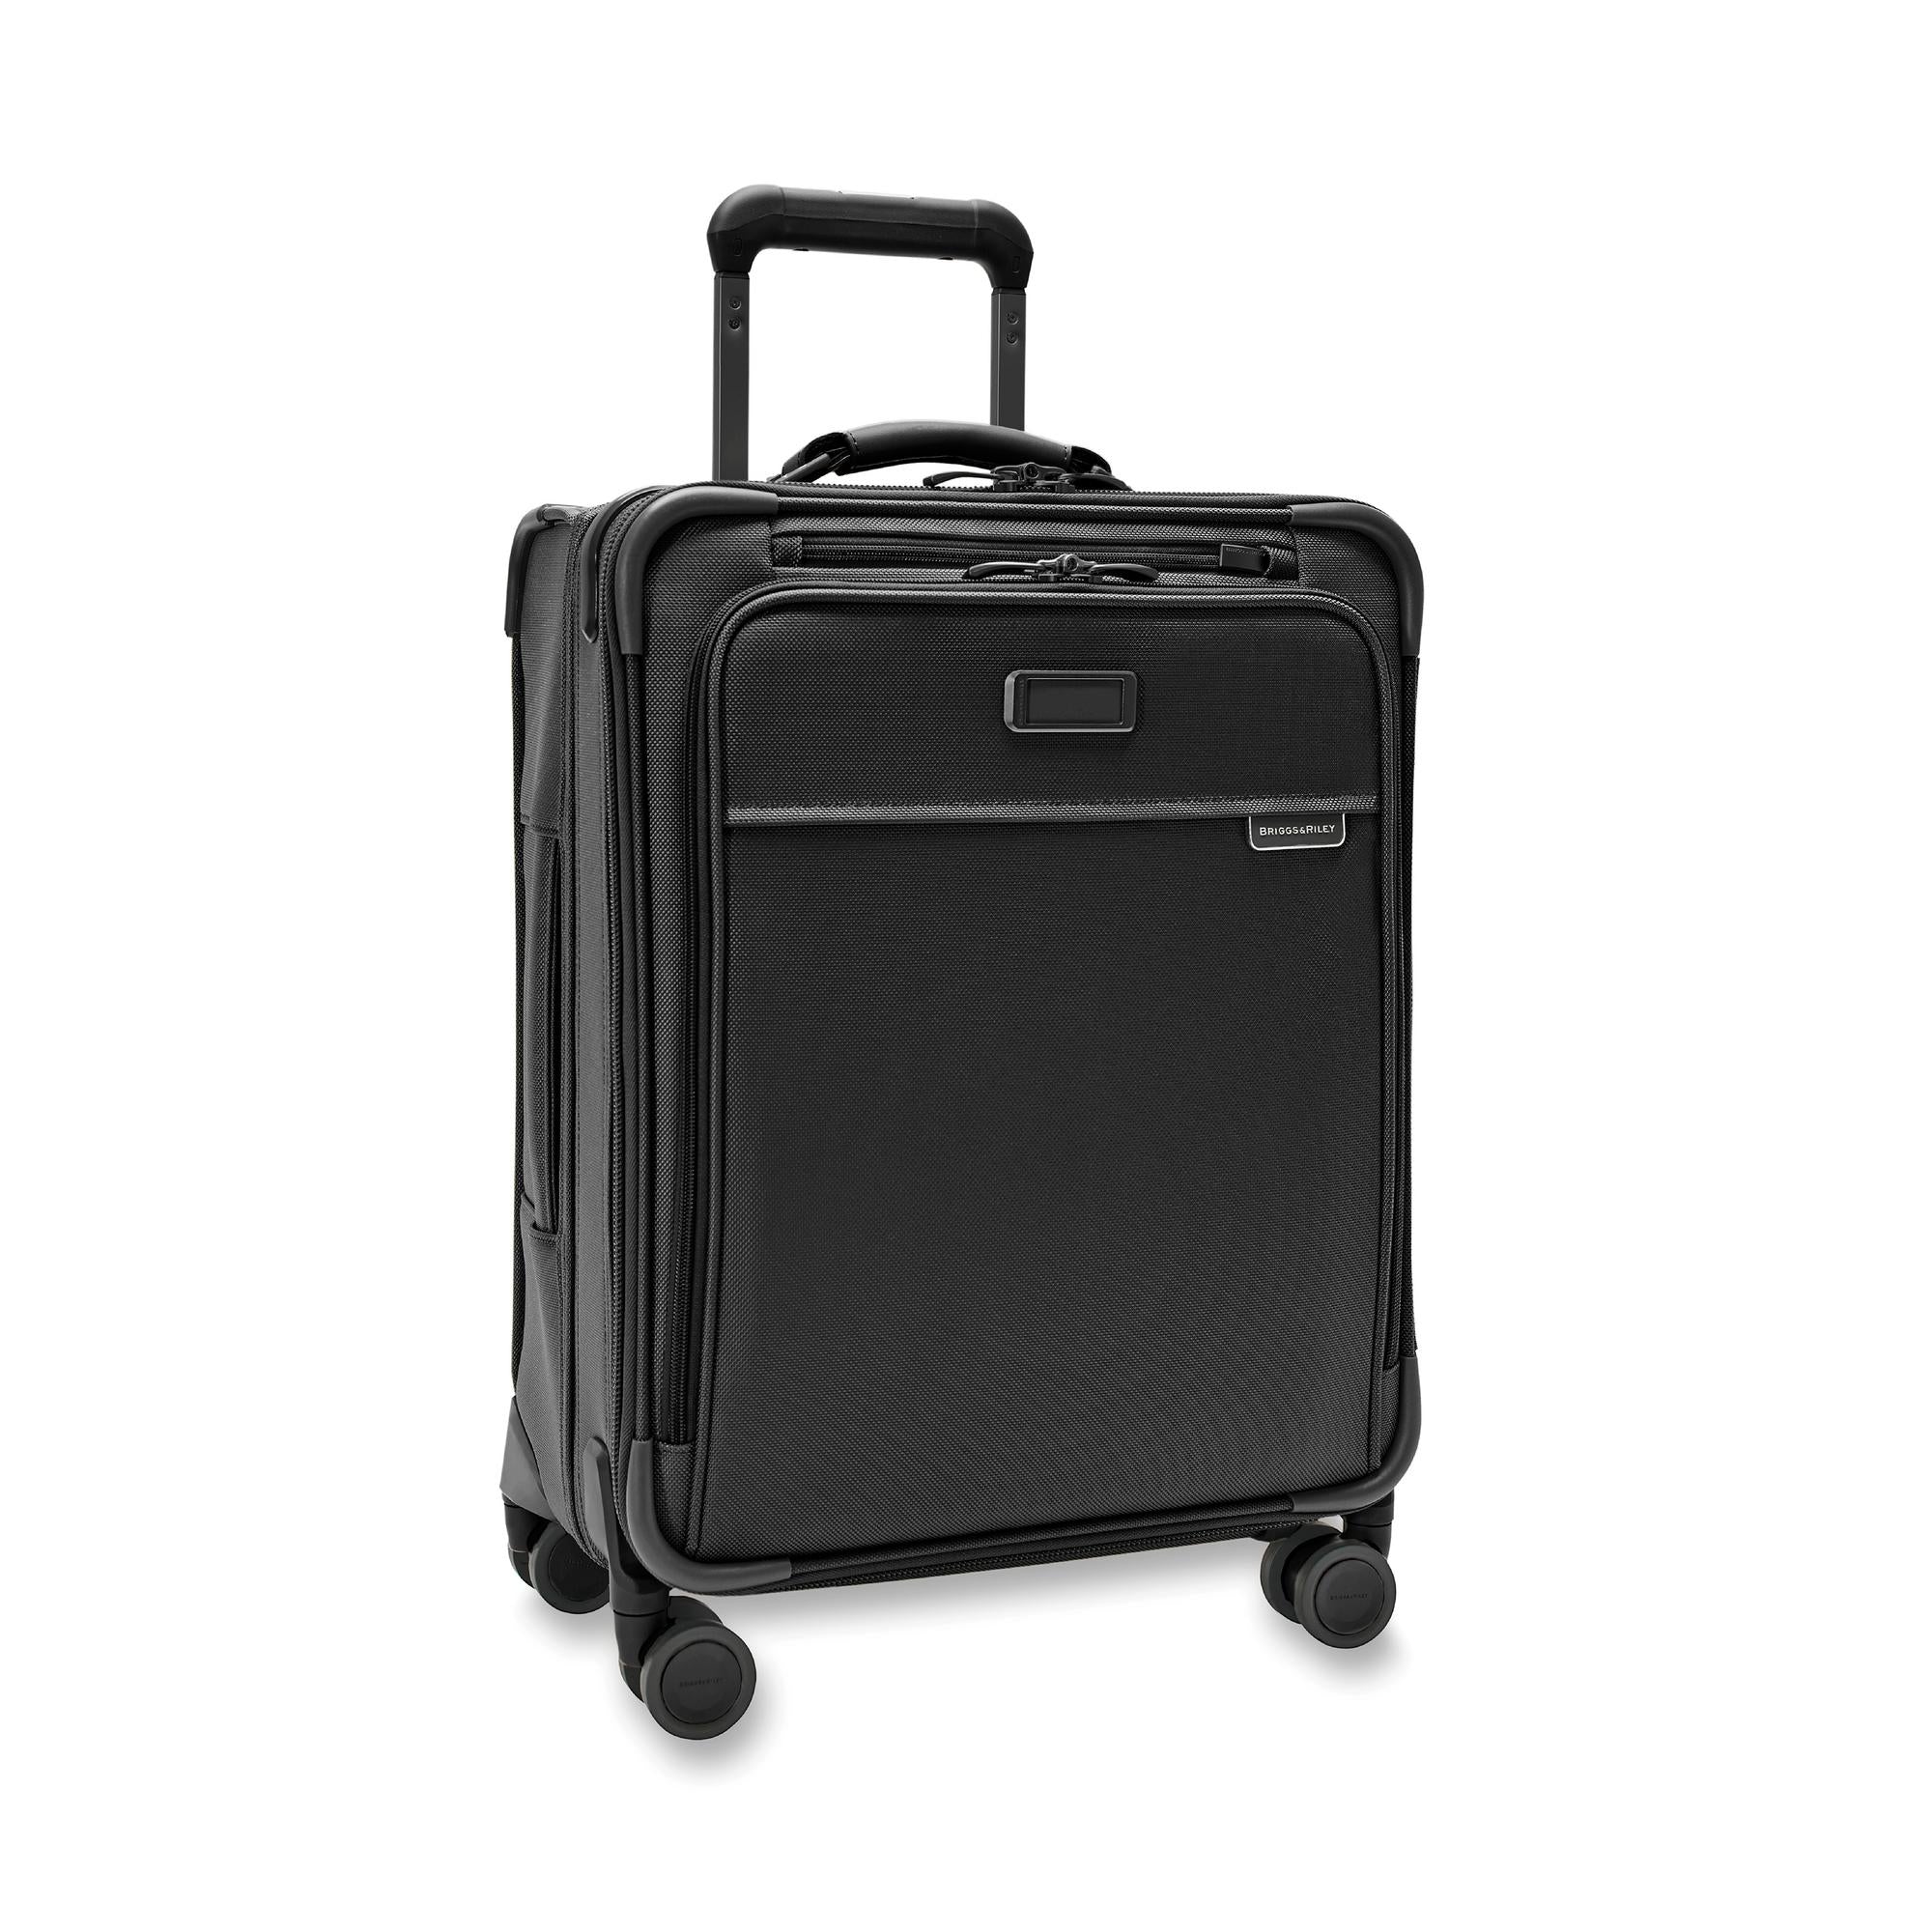 Briggs & Riley Baseline Global Carry-On Spinner – Luggage Pros